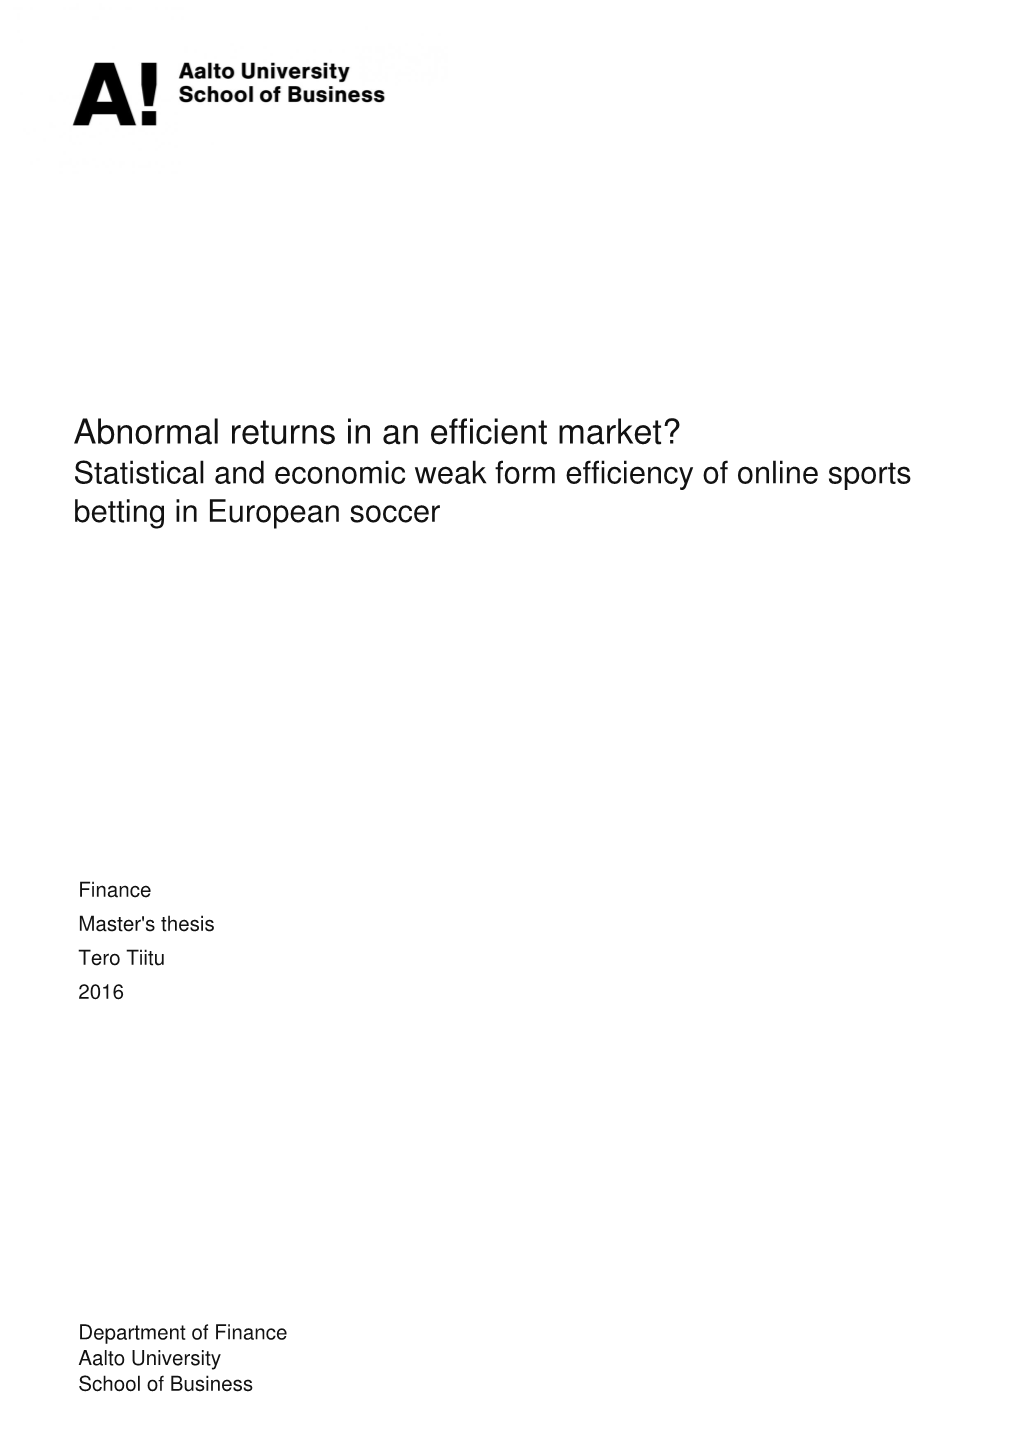 Statistical and Economic Weak Form Efficiency of Online Sports Betting in European Soccer